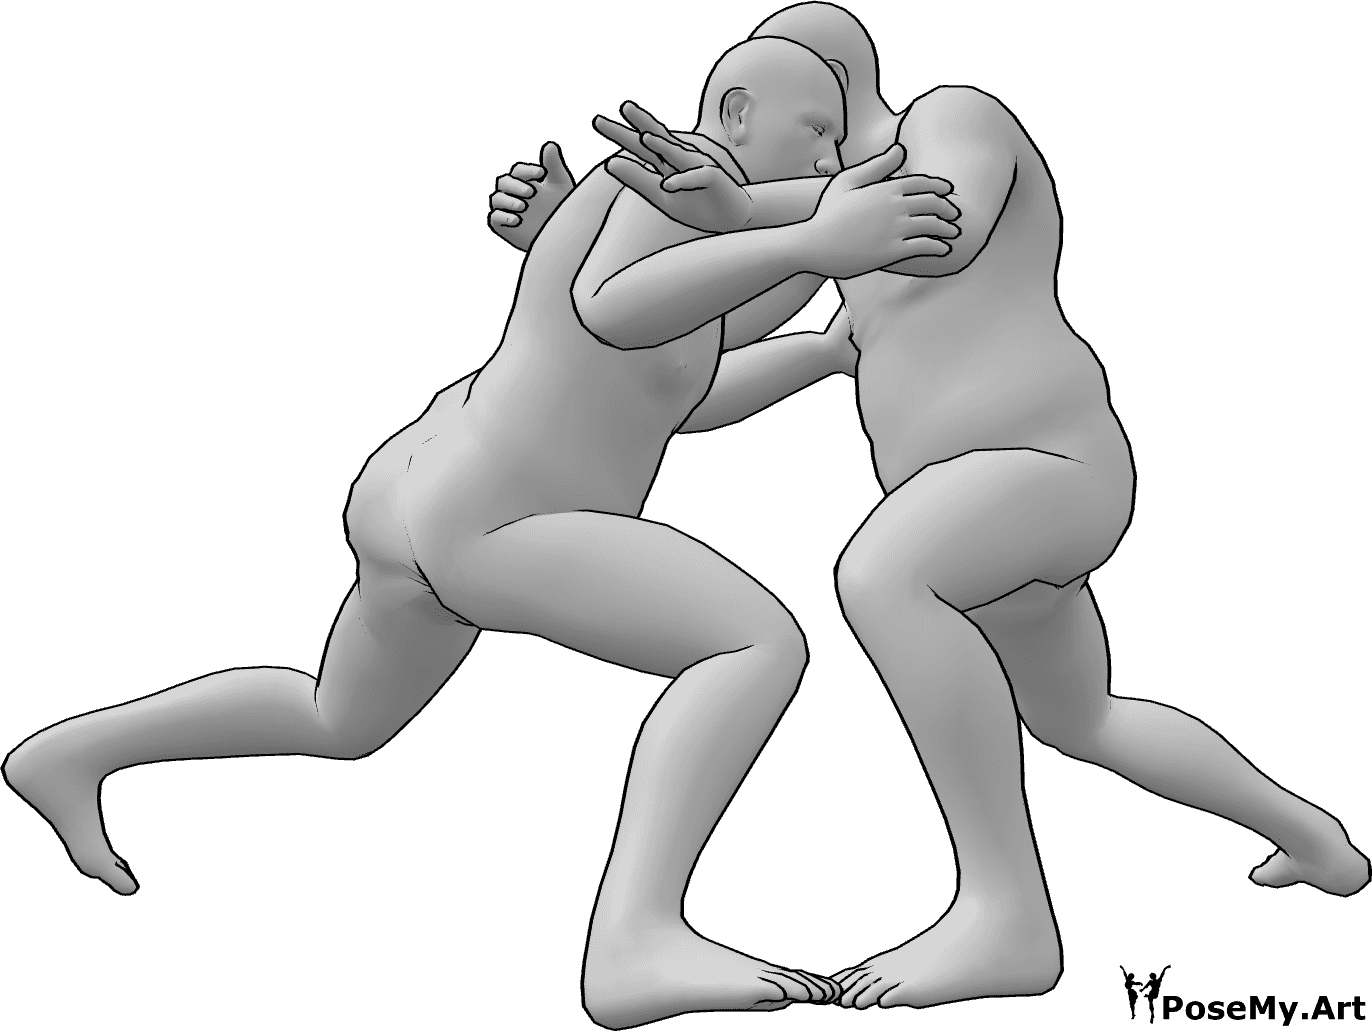 Pose Reference- Sumo wrestling pushing pose - Two male sumo wrestlers are fighting, they are pushing away each other